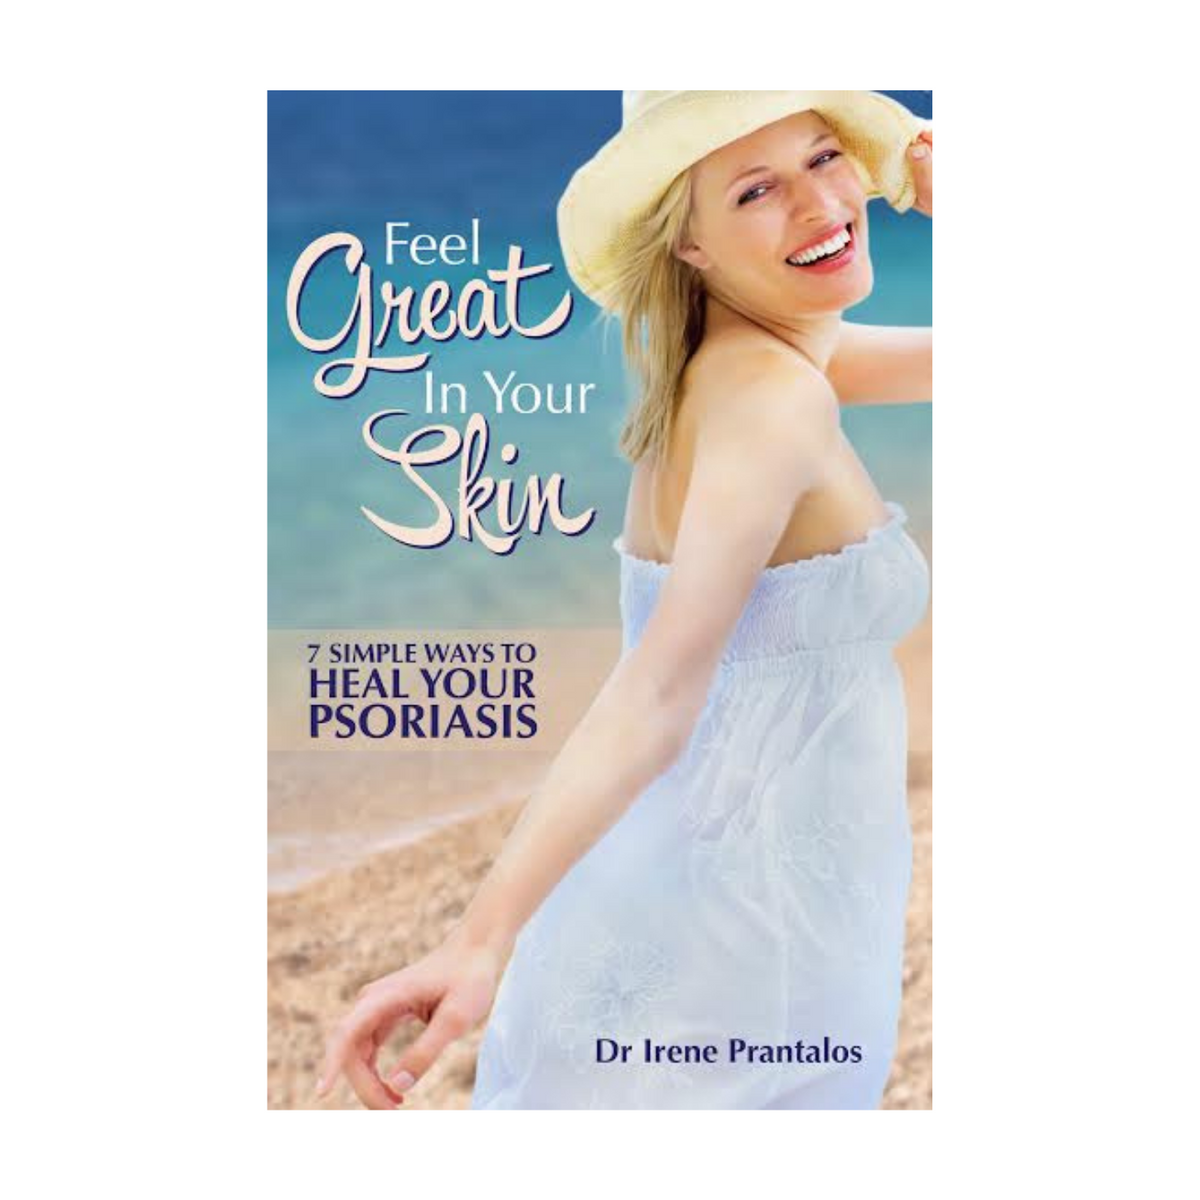 Feel Great In Your Skin a book about healing psoriasis based on the author&#39;s own experience with the disease.